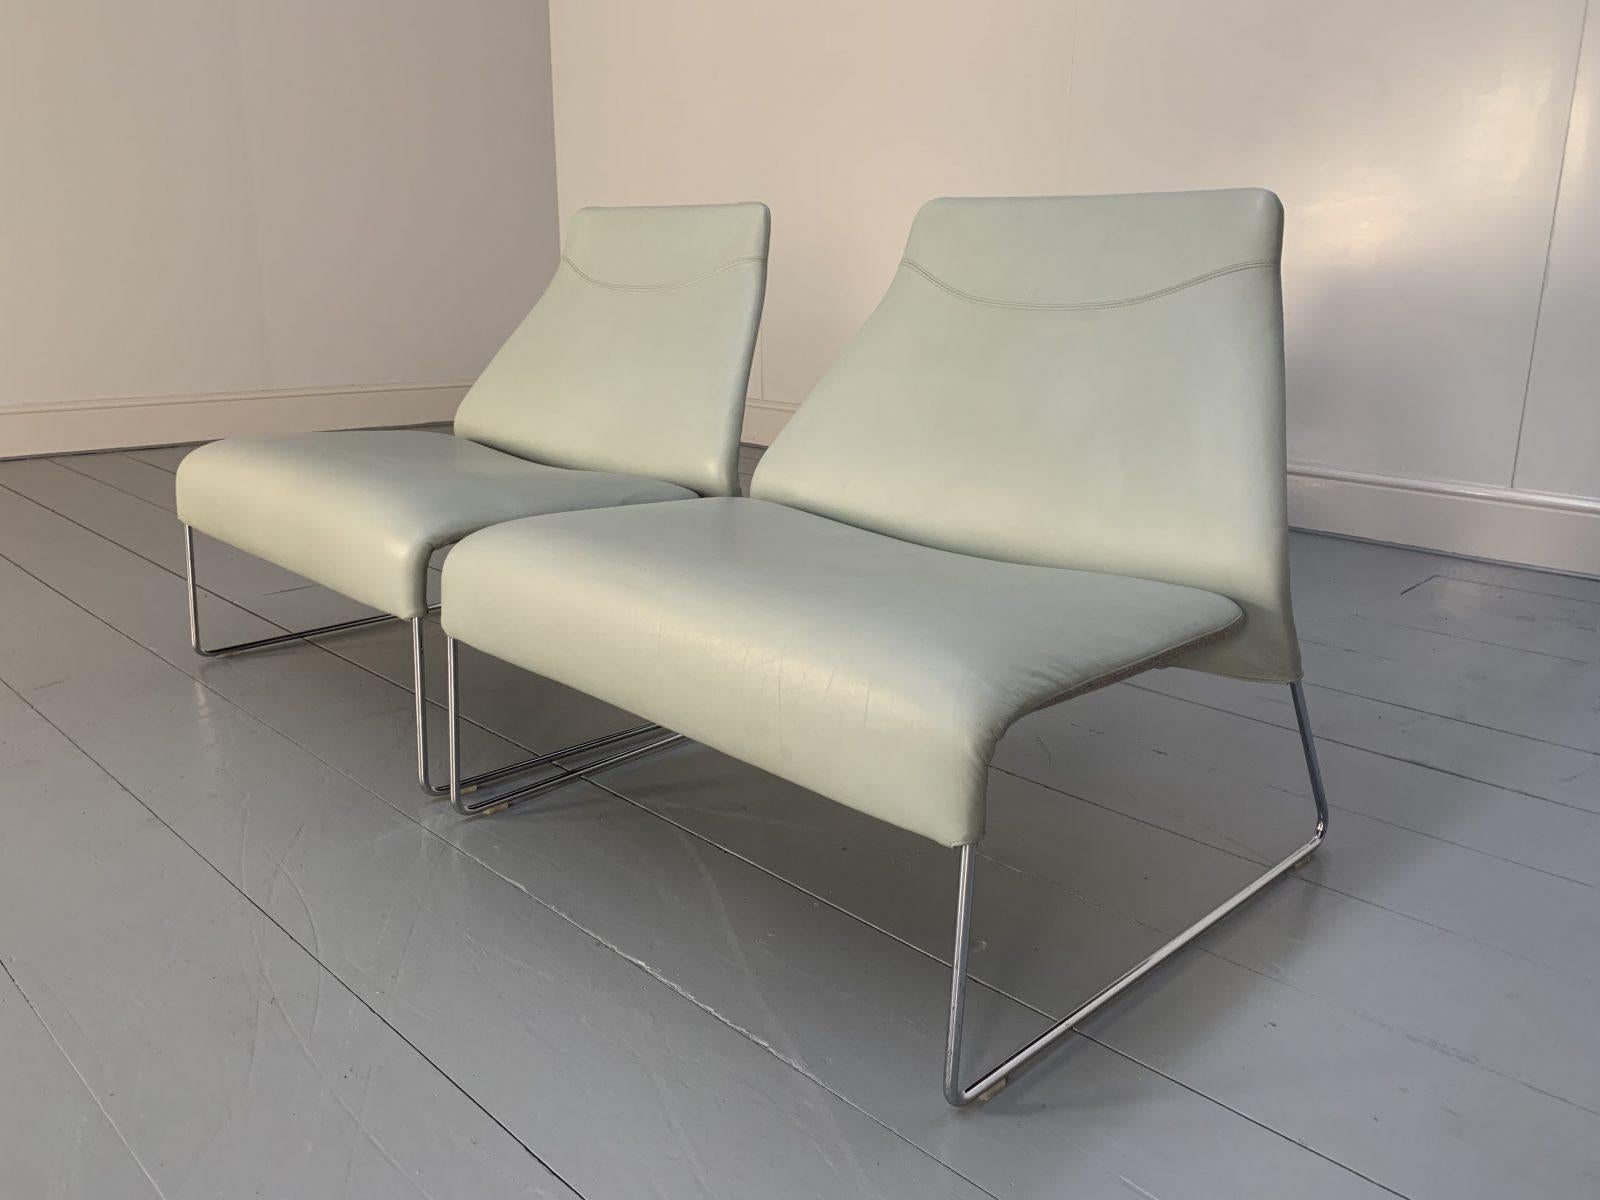 This is a superb, identical pair of B&B Italia “Lazy ’05” Armchairs dressed in a beautiful, peerless, top-grade “Gamma” leather in a pale-grey/blue.

In a world of temporary pleasures, B&B Italia create beautiful furniture that remains a joy